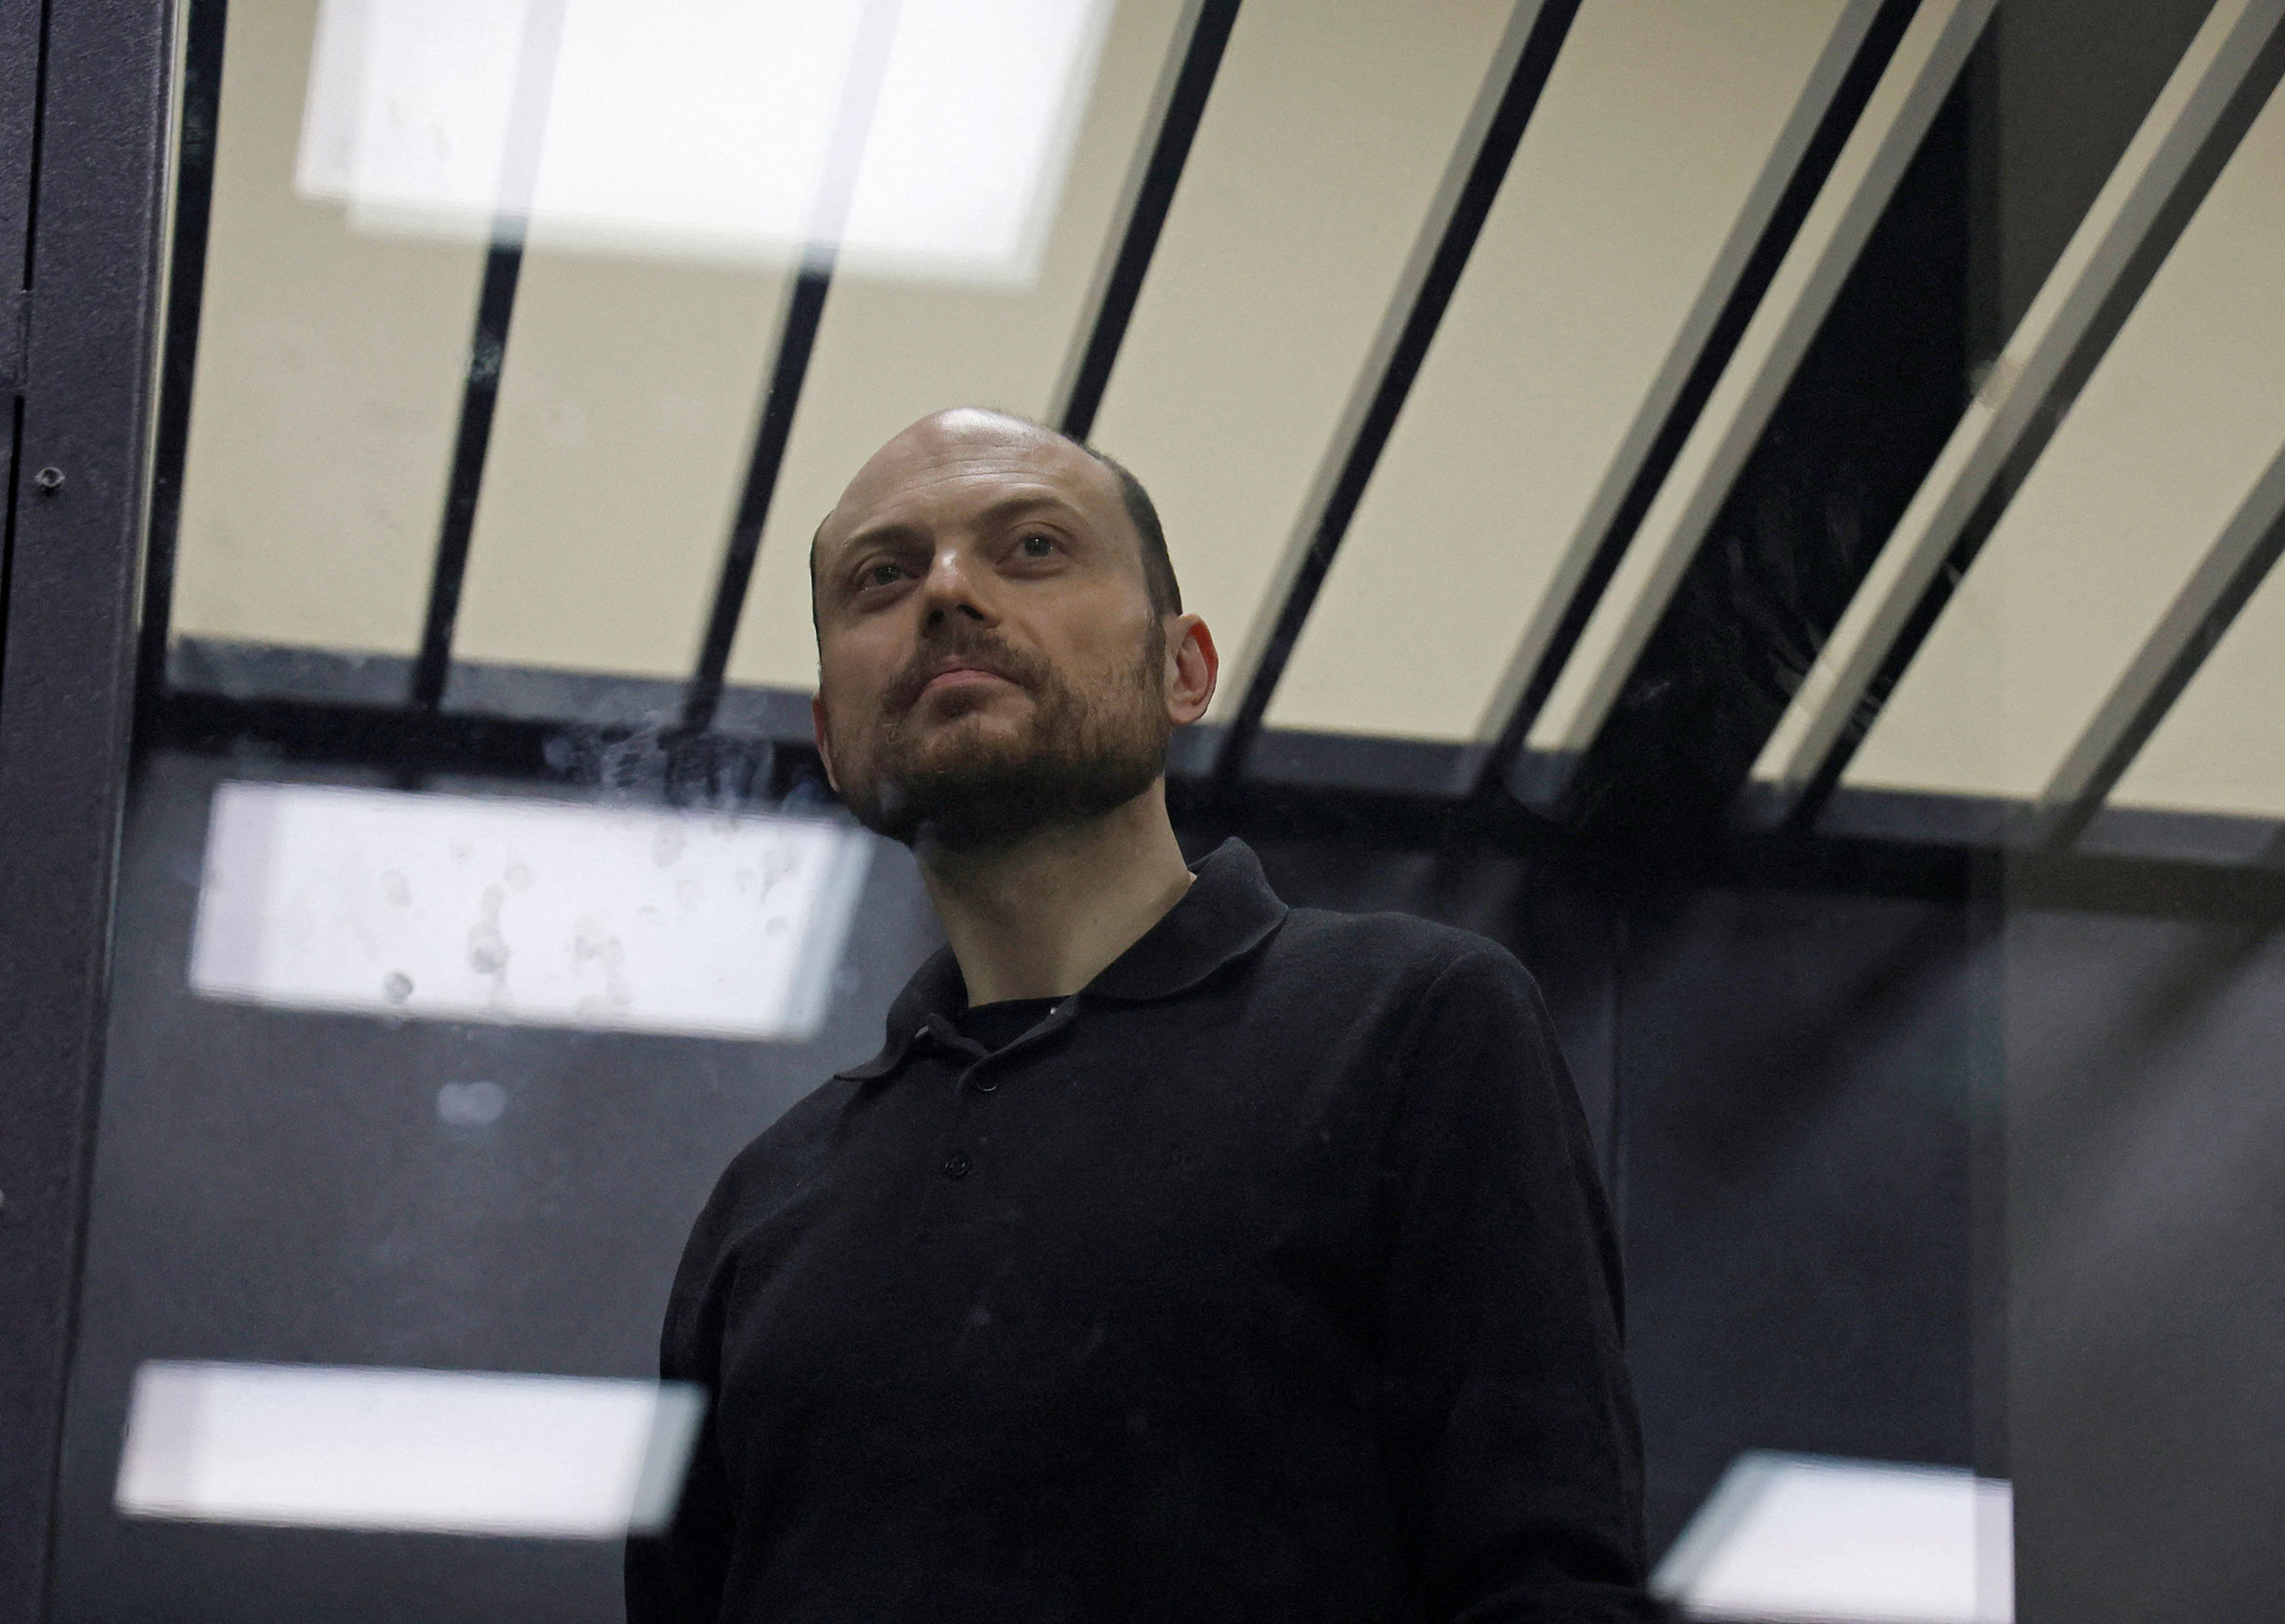 Jailed Russian opposition figure Vladimir Kara-Murza stands behind a glass wall of an enclosure for defendants during a court hearing to consider an appeal against his prison sentence, in Moscow, Russia July 31, 2023.